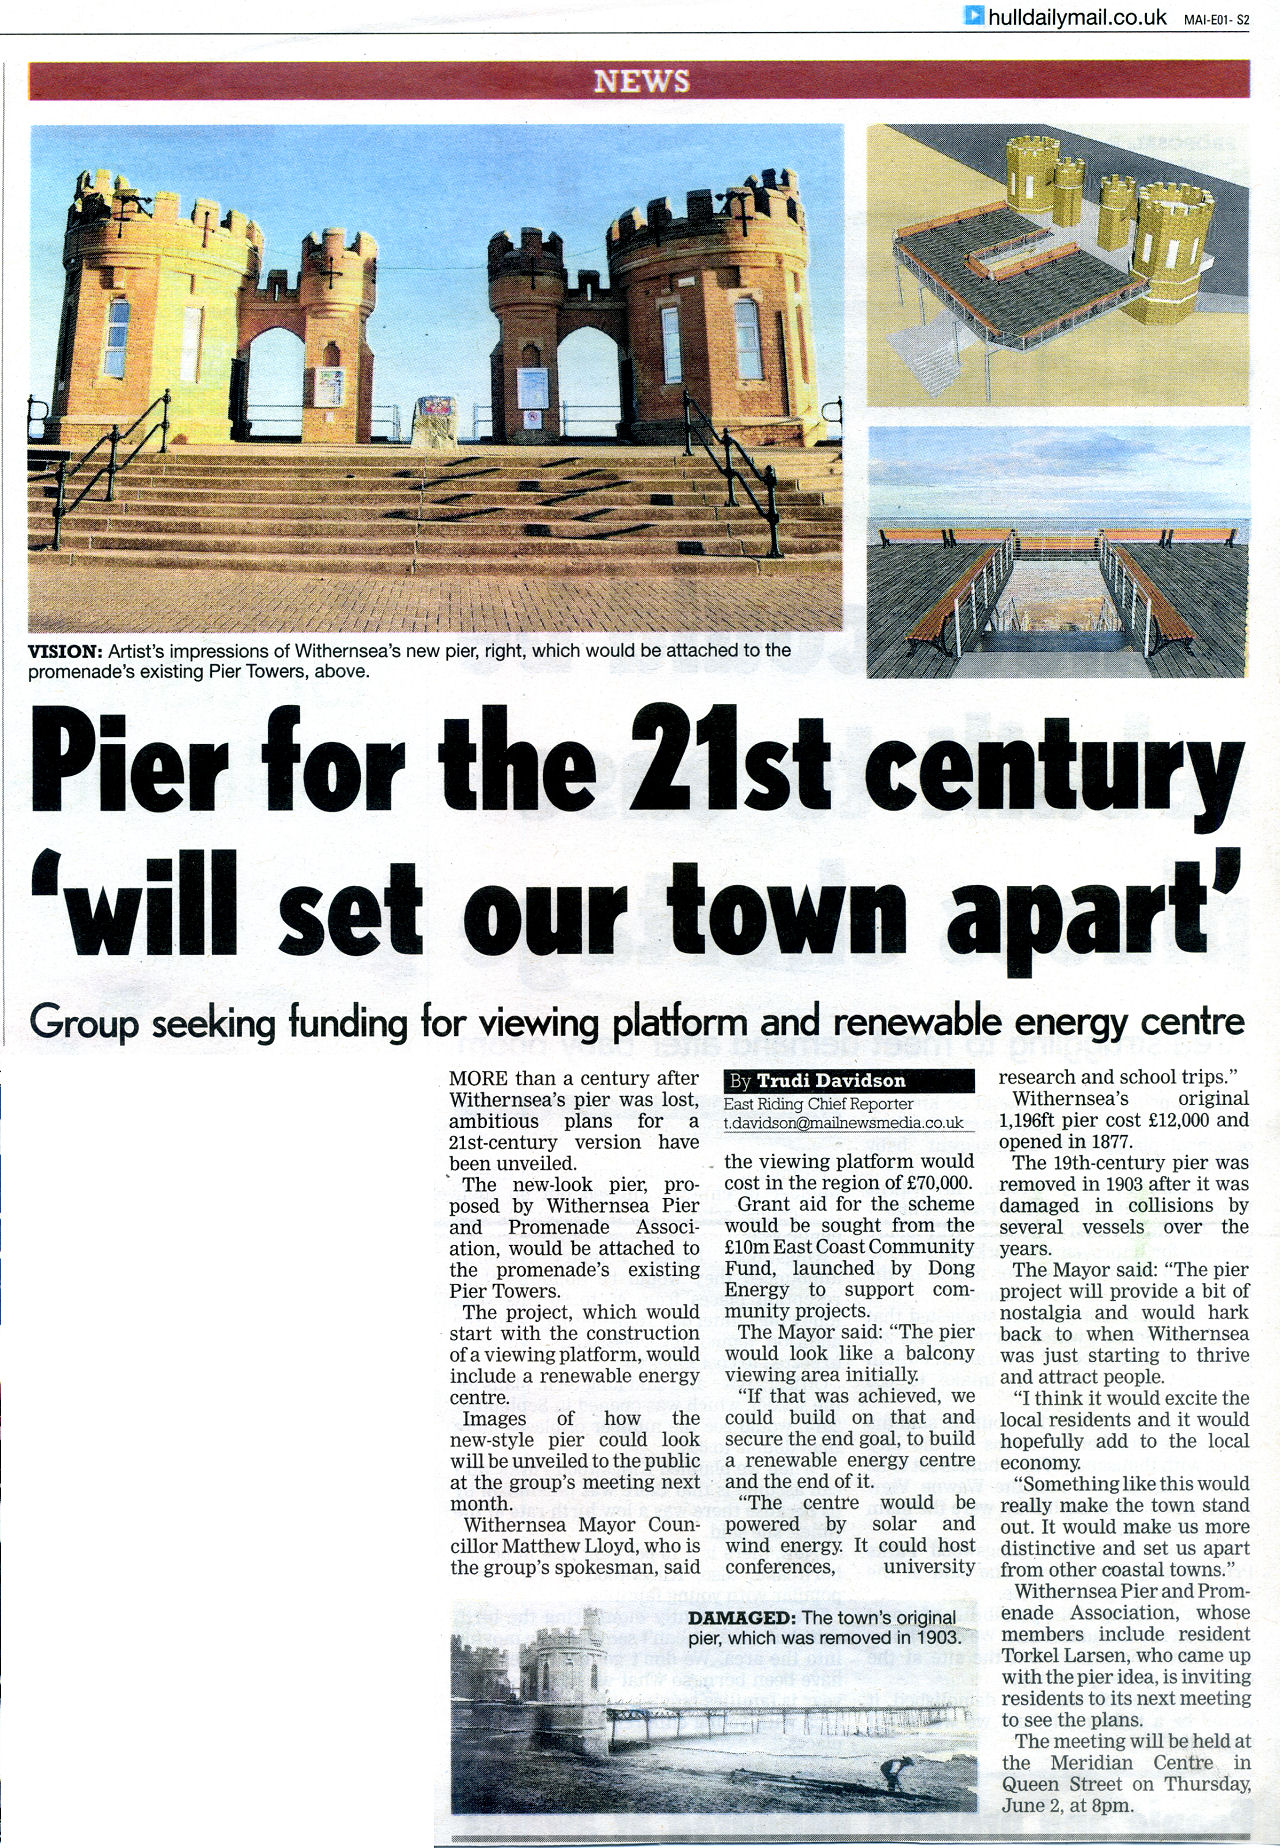 Withernsea Pier Press Coverage Hull Daily Mail 13th May 2016